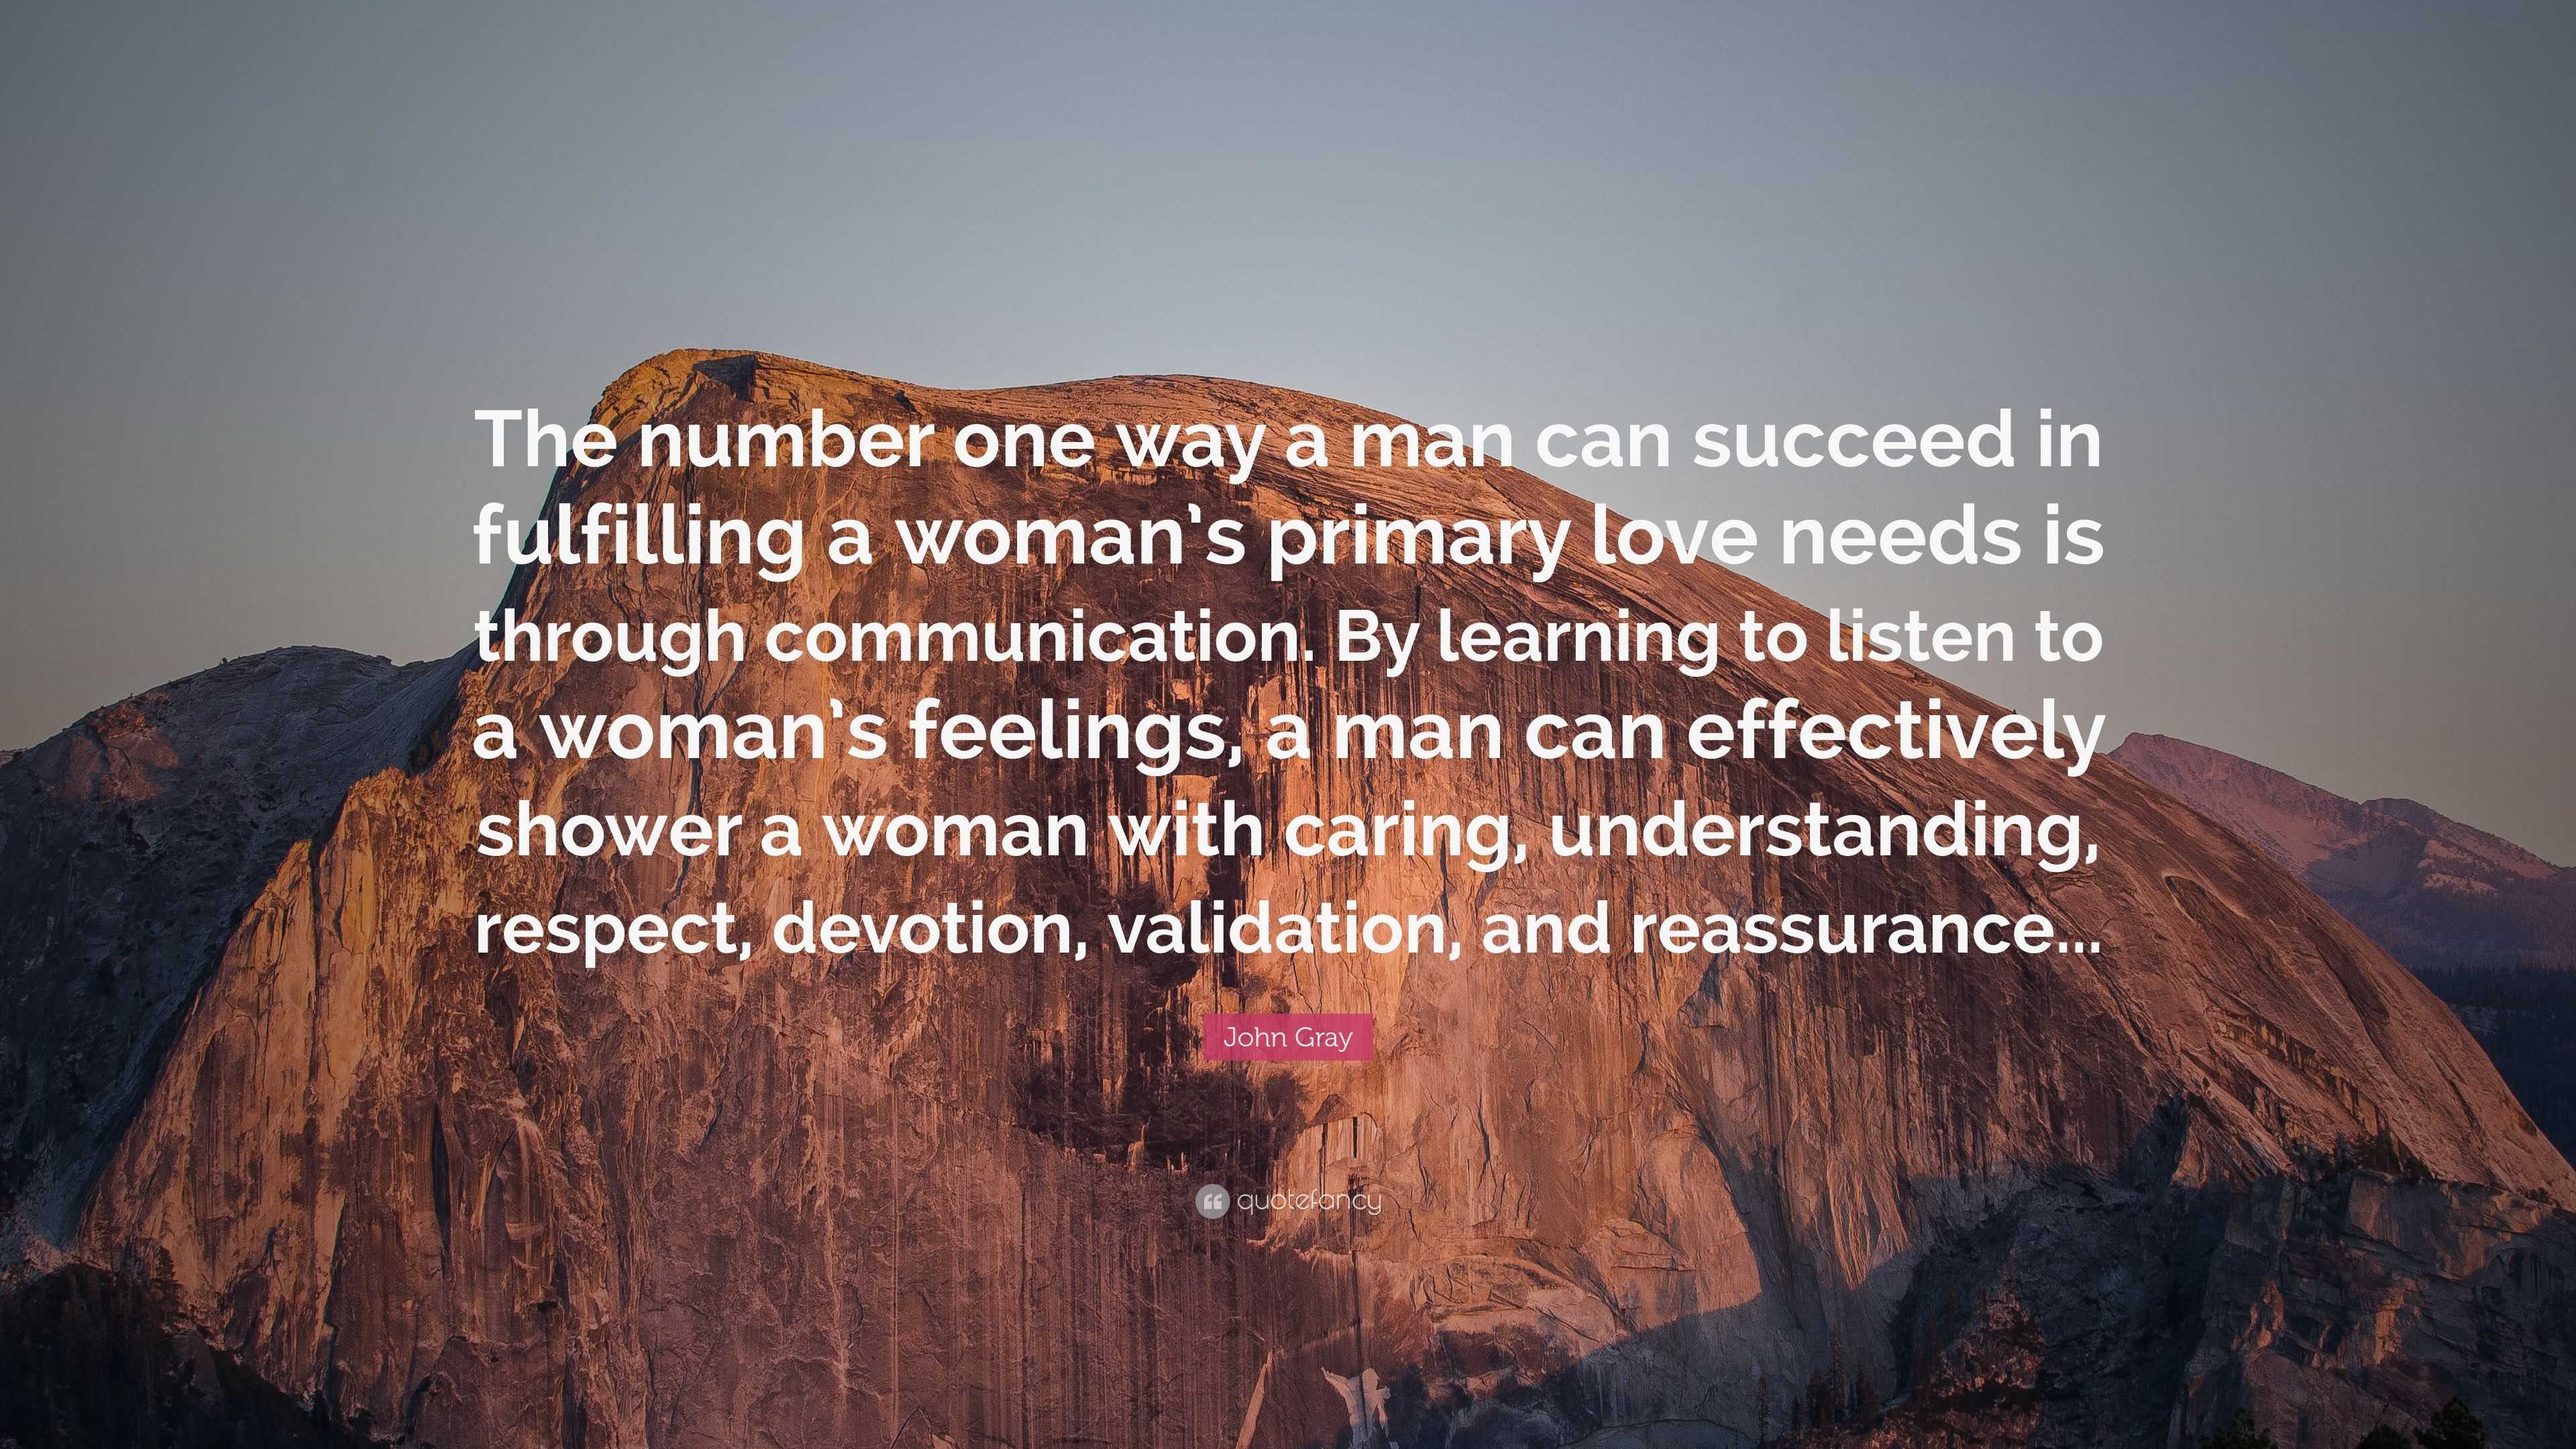 John Gray Quote: “The number one way a man can succeed in fulfilling a ...